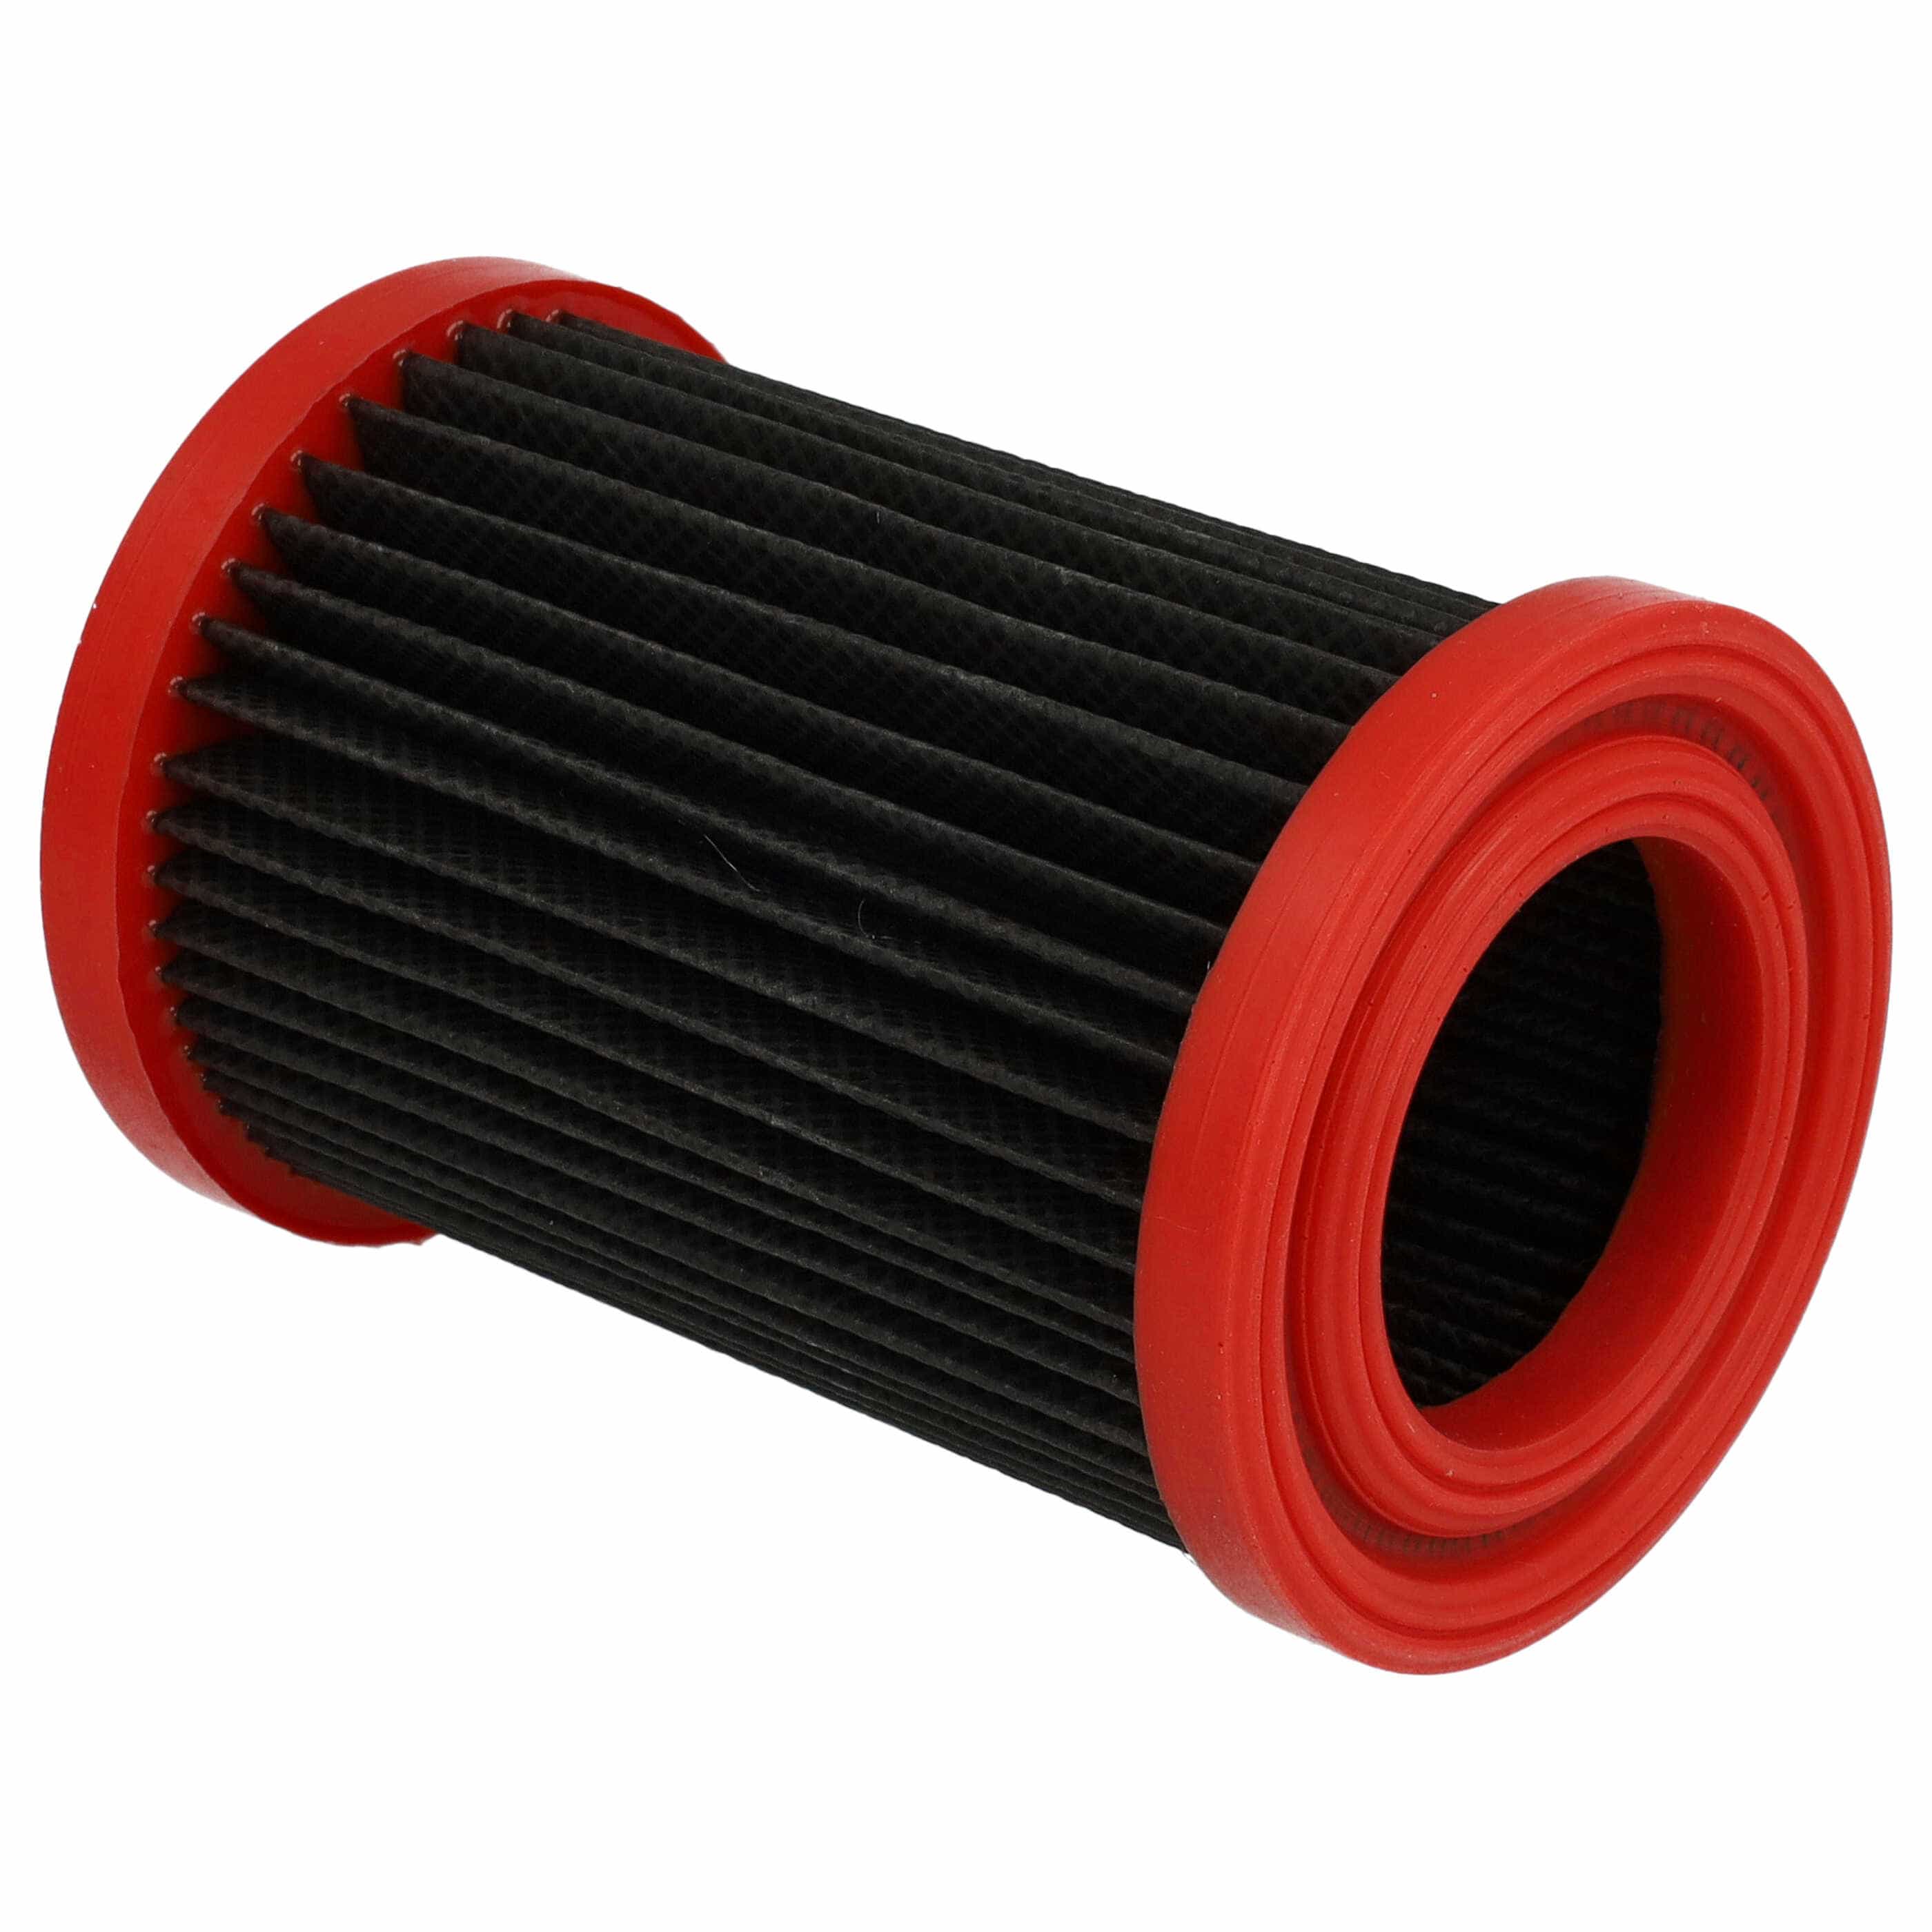 1x air filter replaces LG G785954 for LG Vacuum Cleaner, black